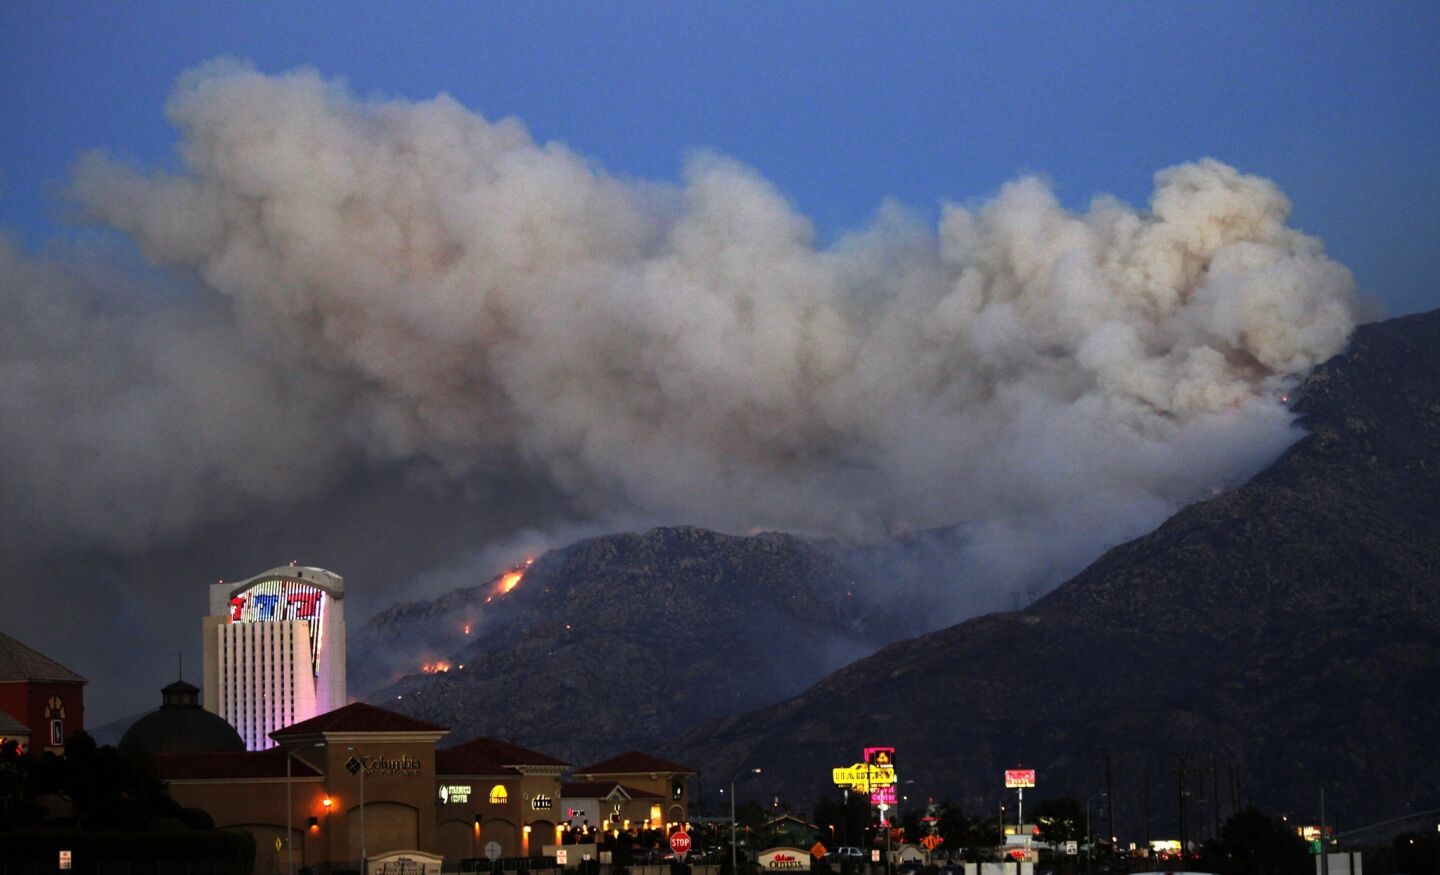 The Silver fire burns east toward wind turbines and a view of Morongo Casino, Resort & Spa in Cabazon.